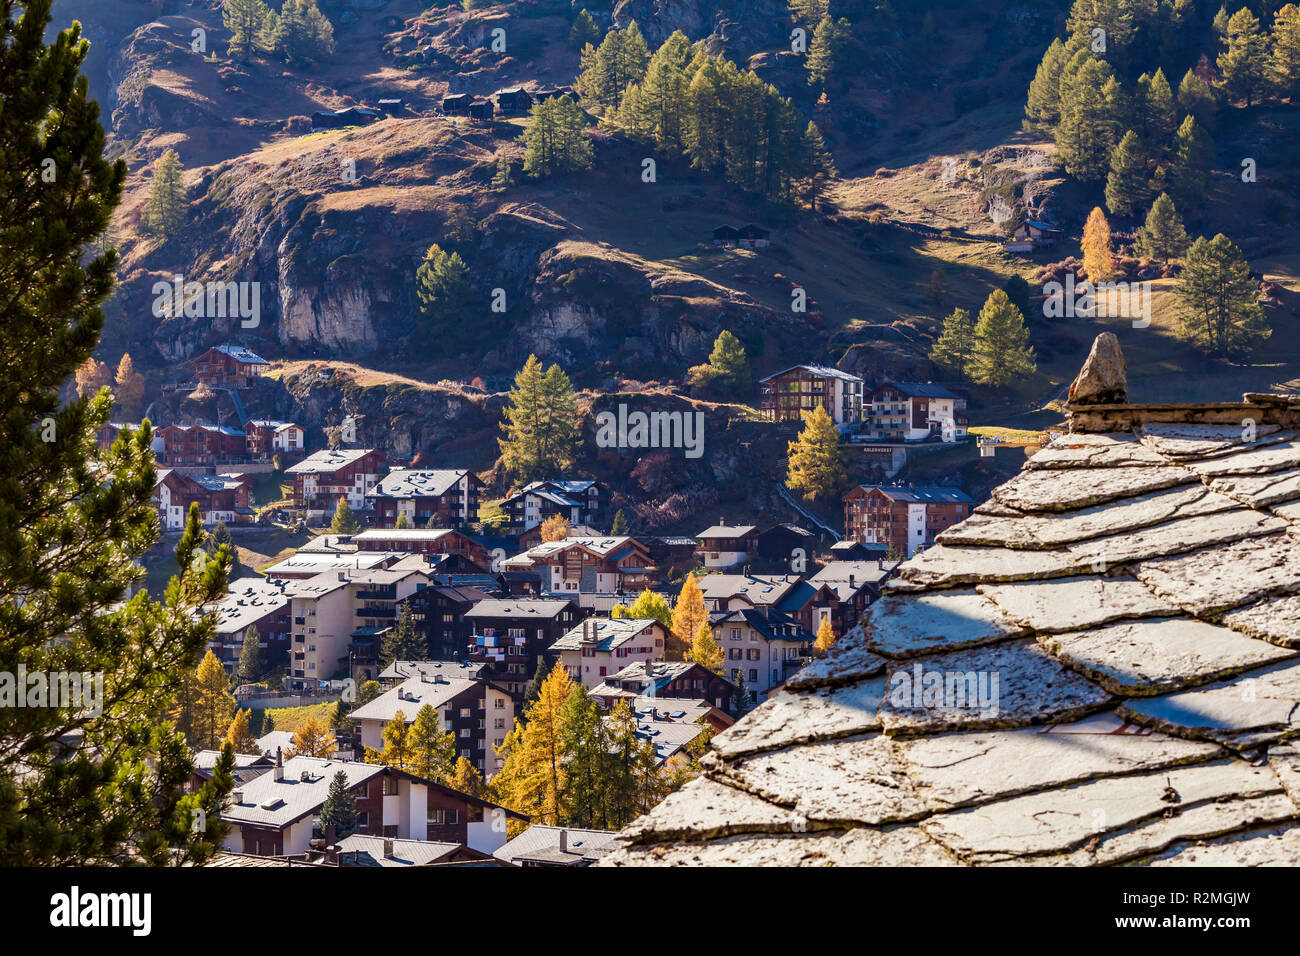 Switzerland, canton Valais, Zermatt, view of the village, chalets, holiday houses, holiday apartments, roof covered with stone slabs Stock Photo